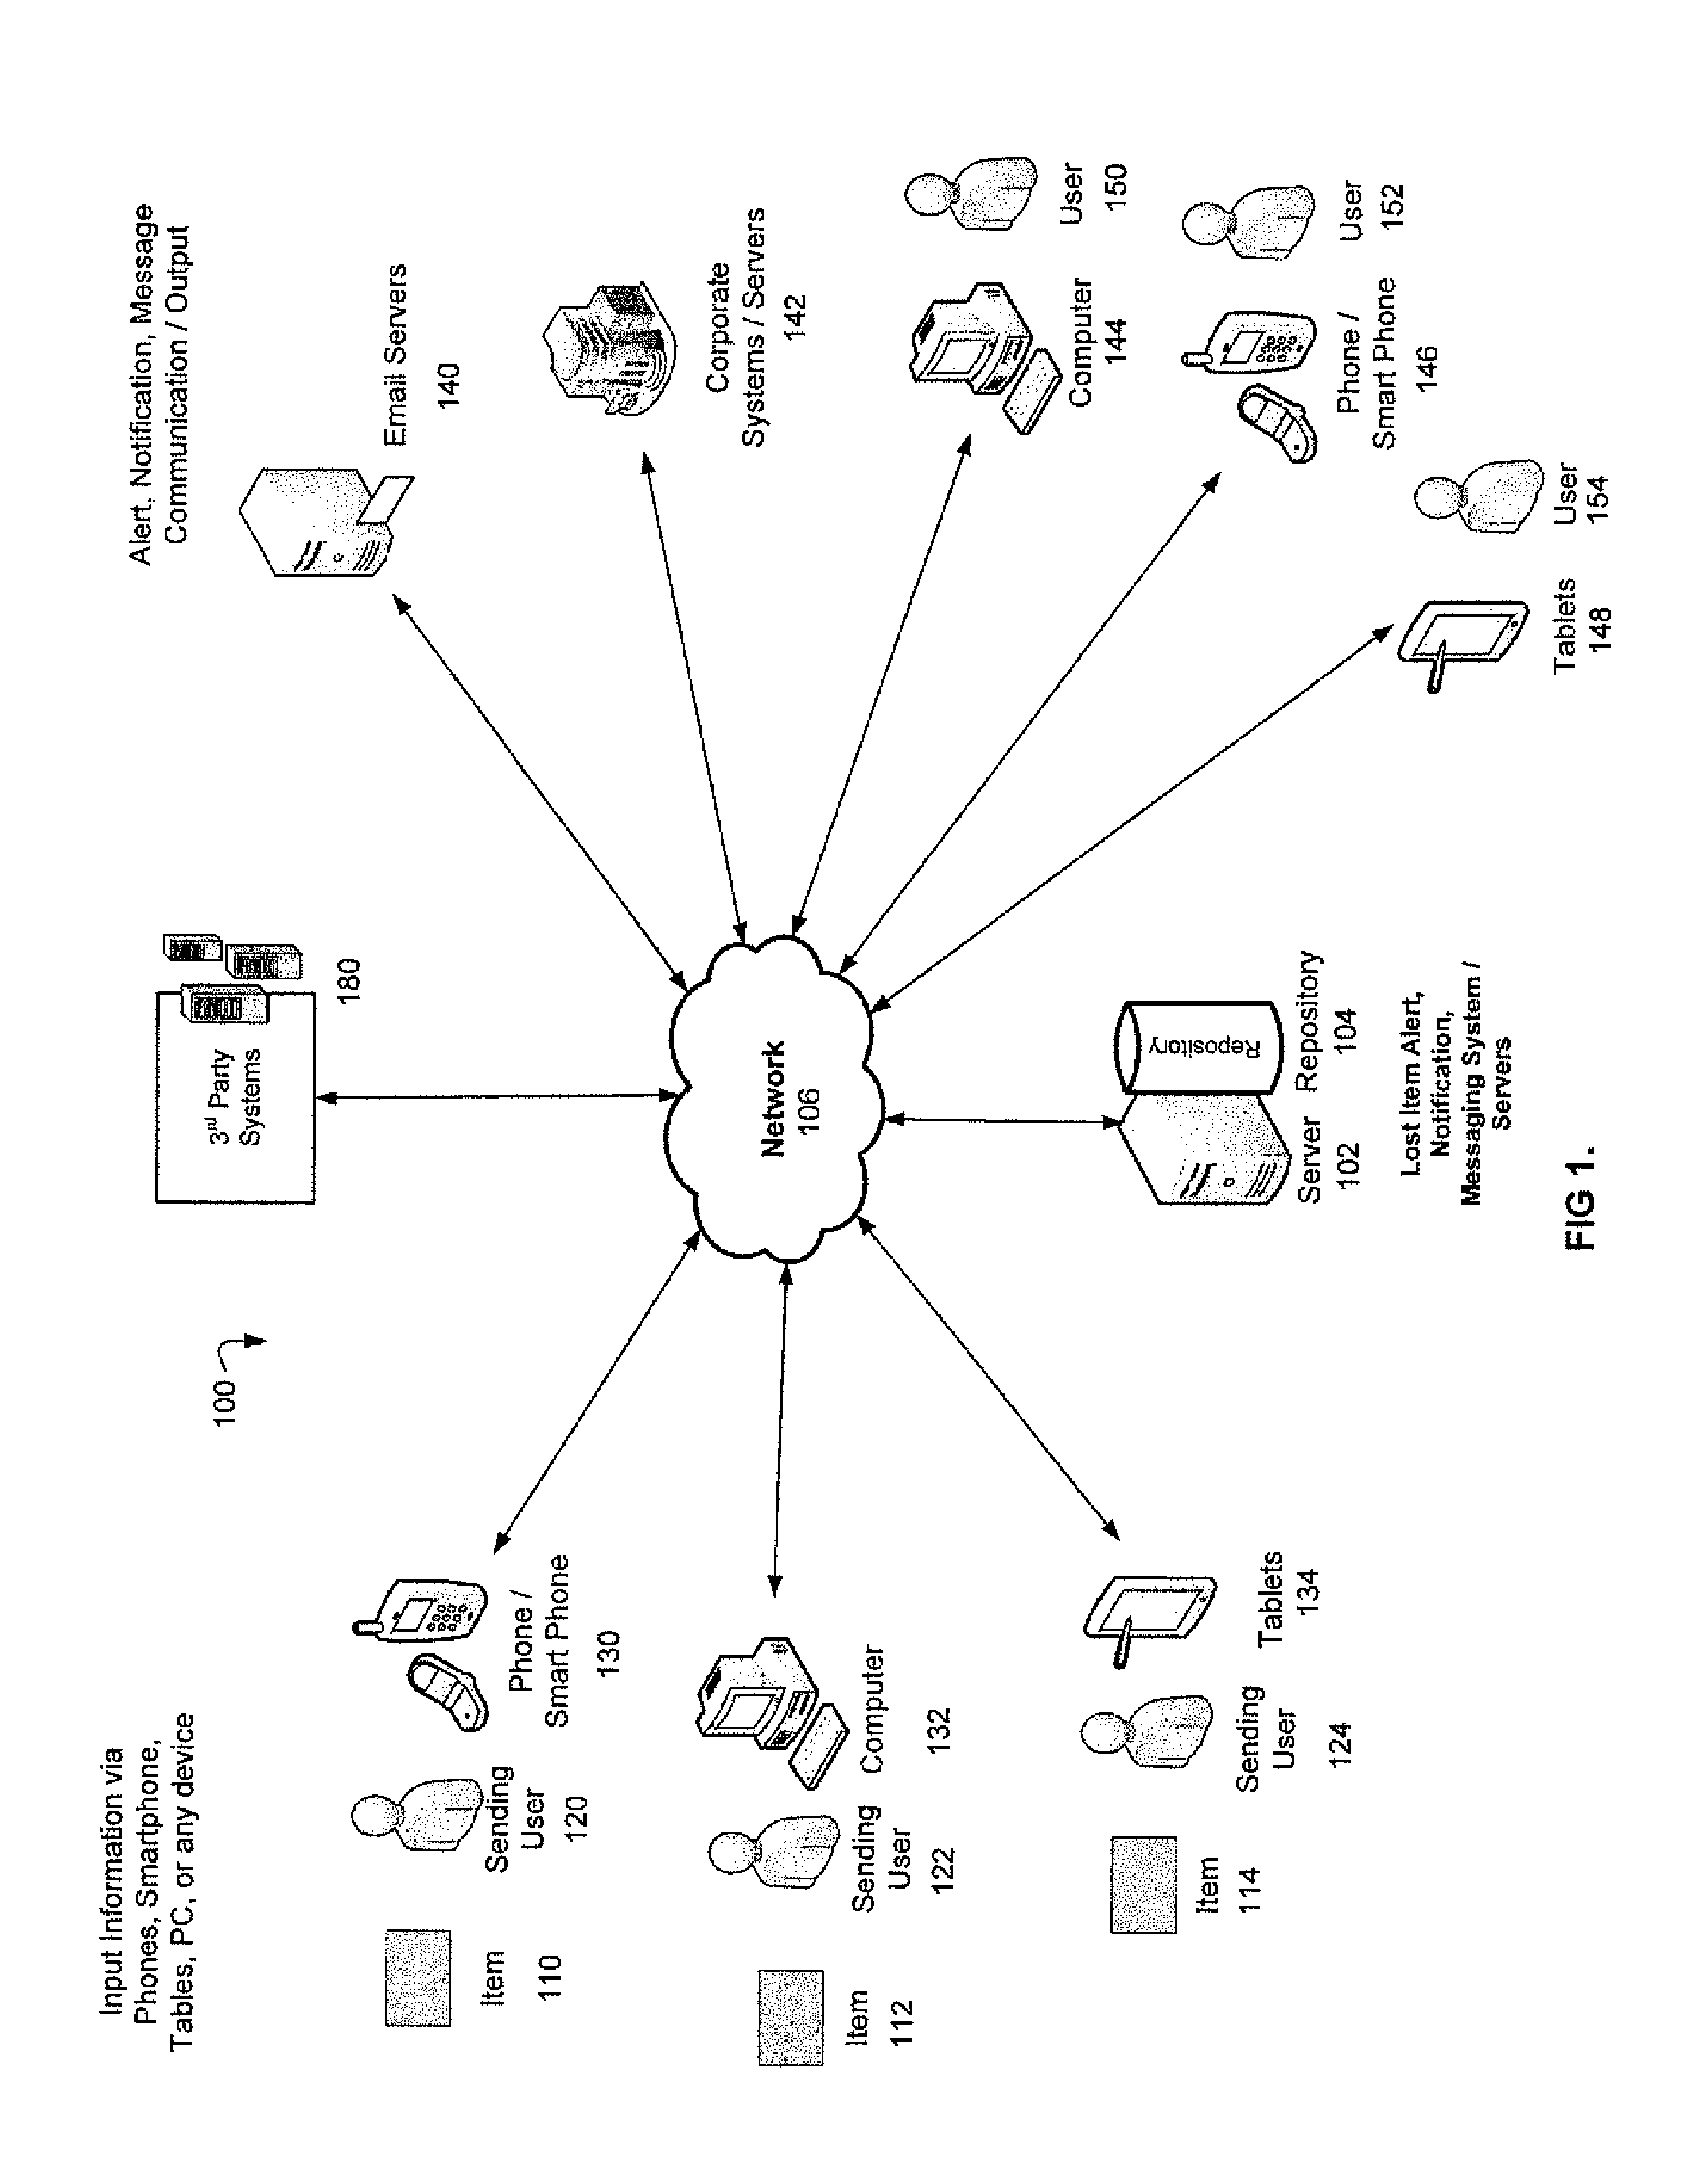 System and Method for Lost Item and Product Alerts, Notifications, and Messaging Communications